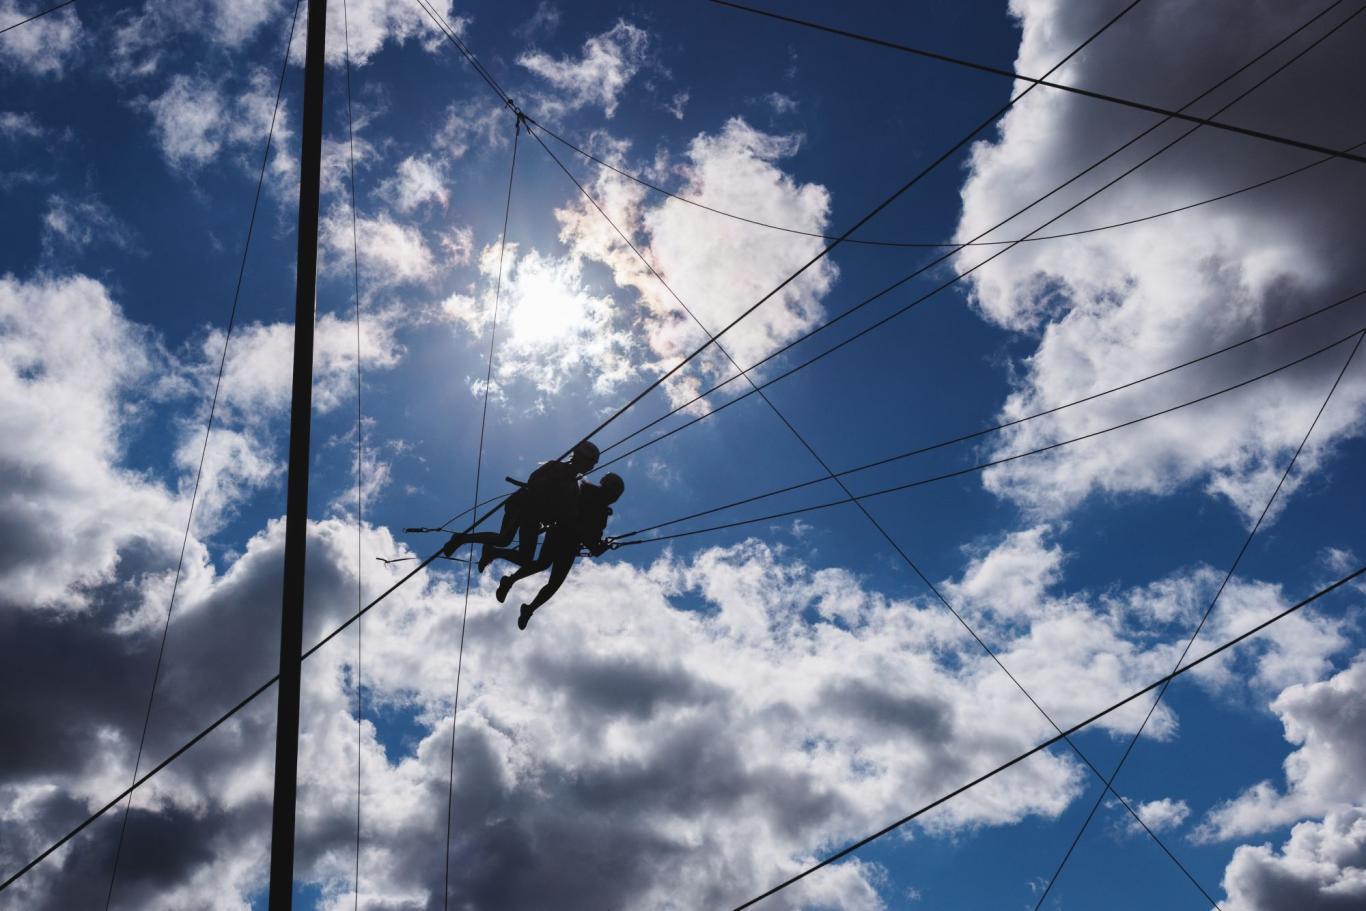 Silhouettes of two CLC students, set against a cloudy sunlit sky, as they jump during a rope course on a school adventure day